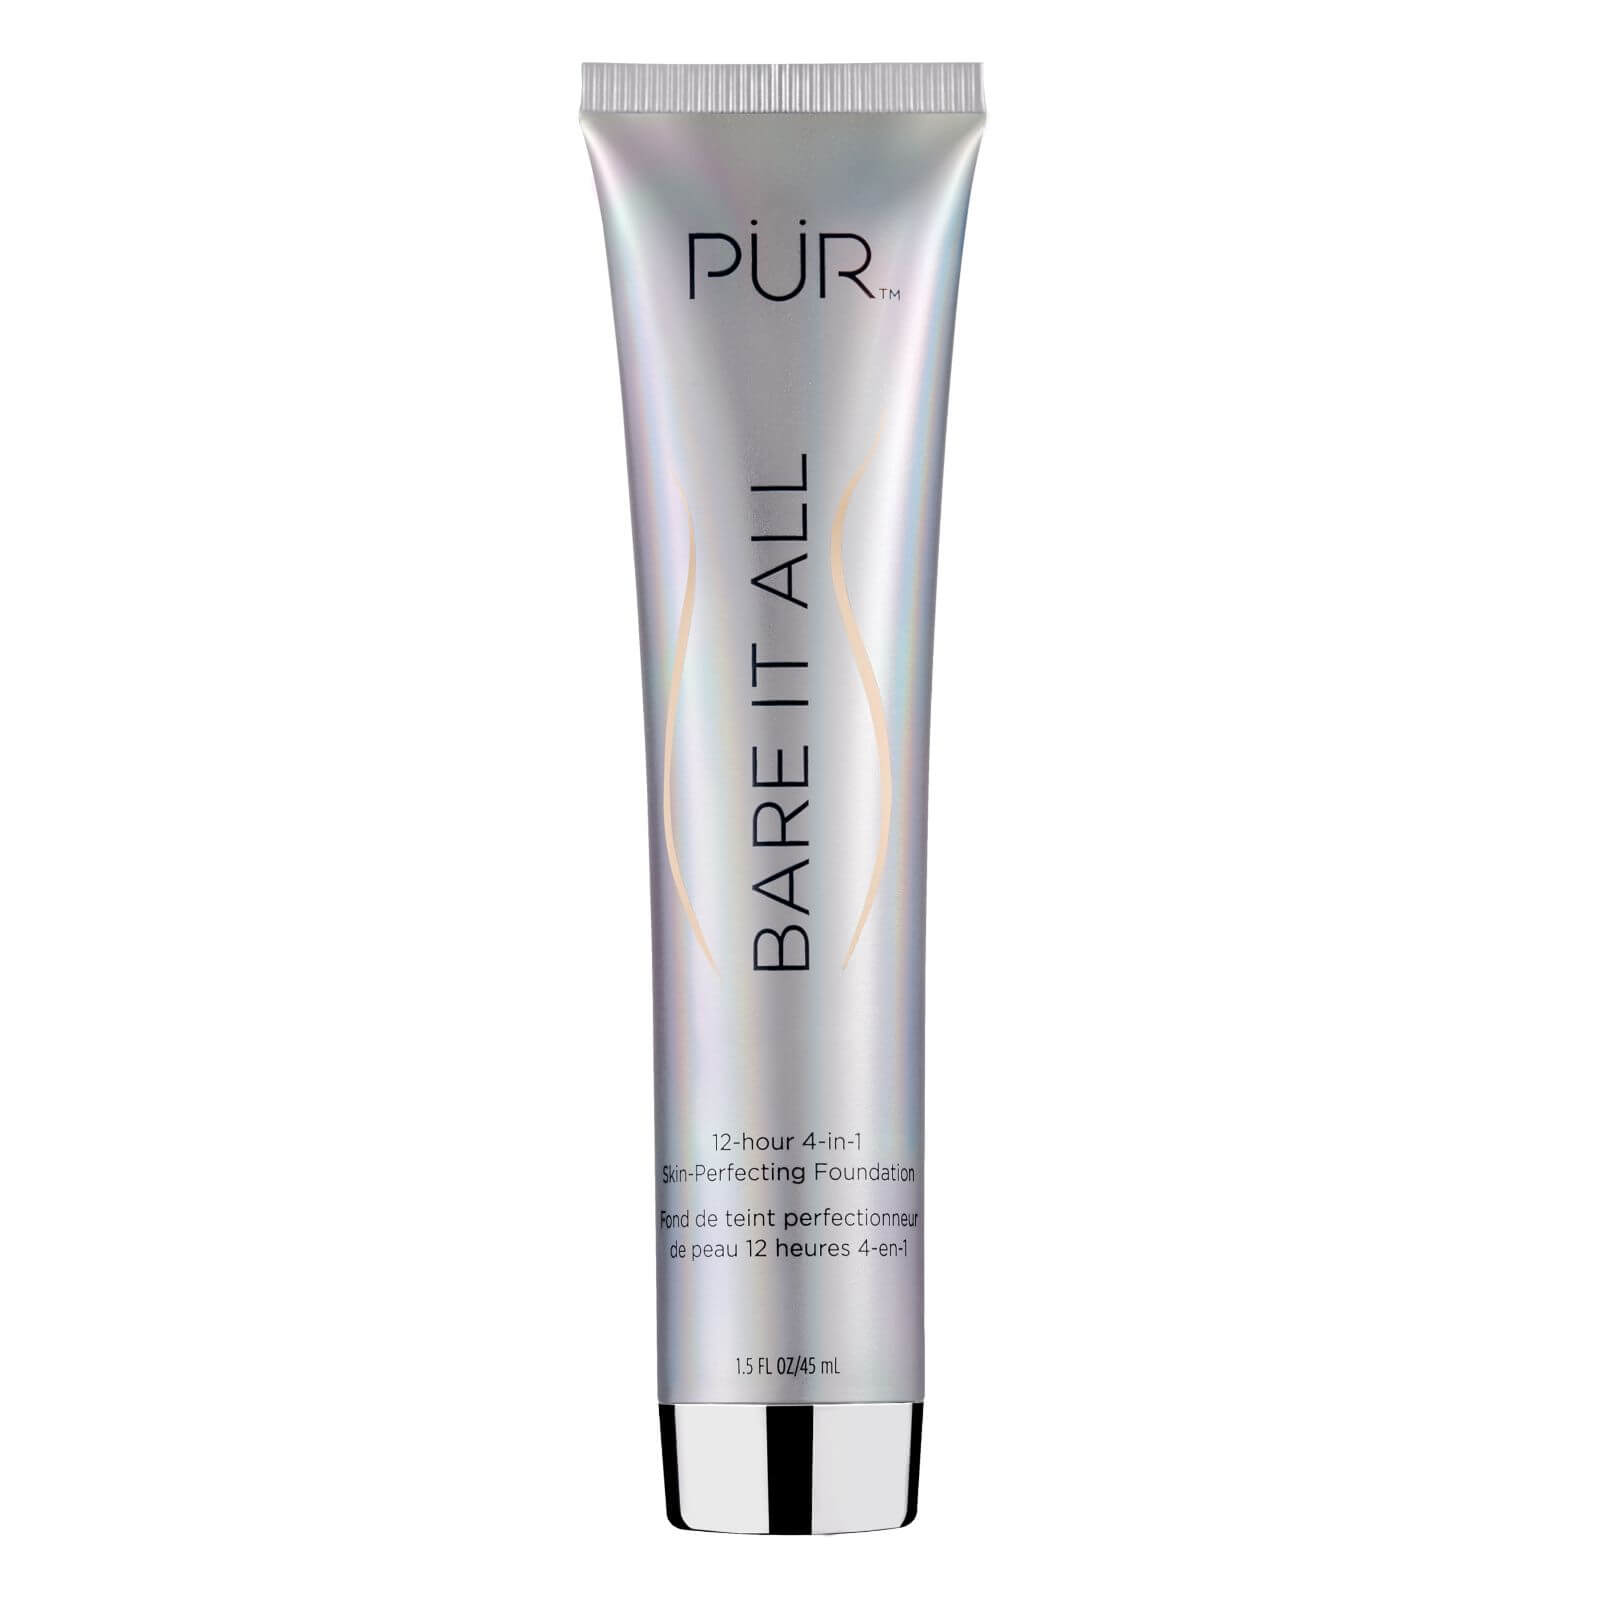 PÜR Bare It All 4-in-1 Skin Perfecting Foundation 45ml (Various Shades) - Porcelain